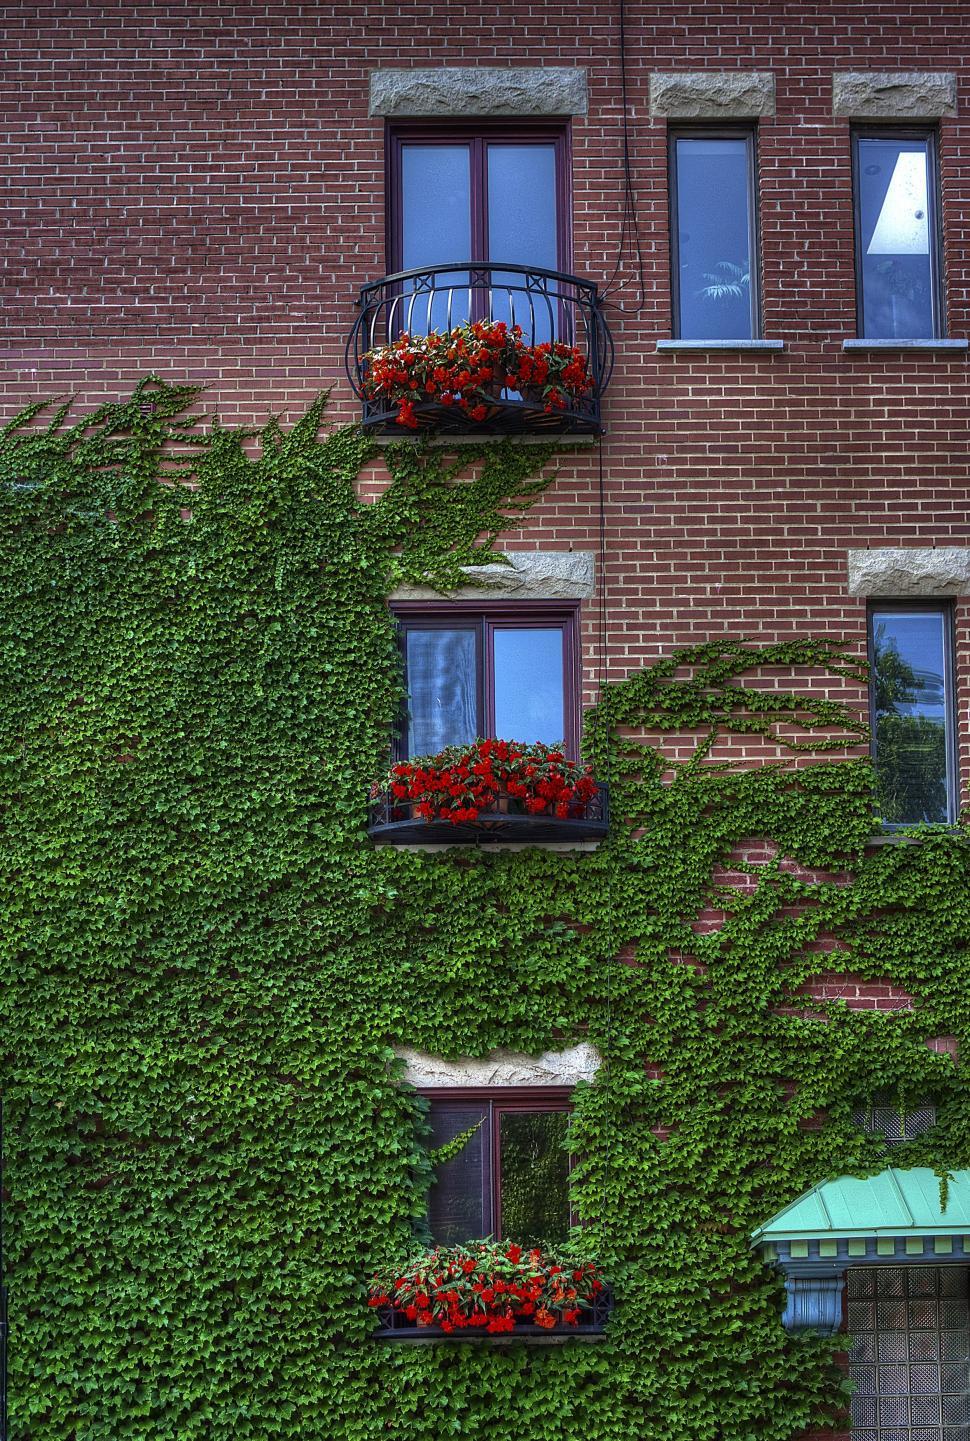 Free Image of Windows with red flowers  